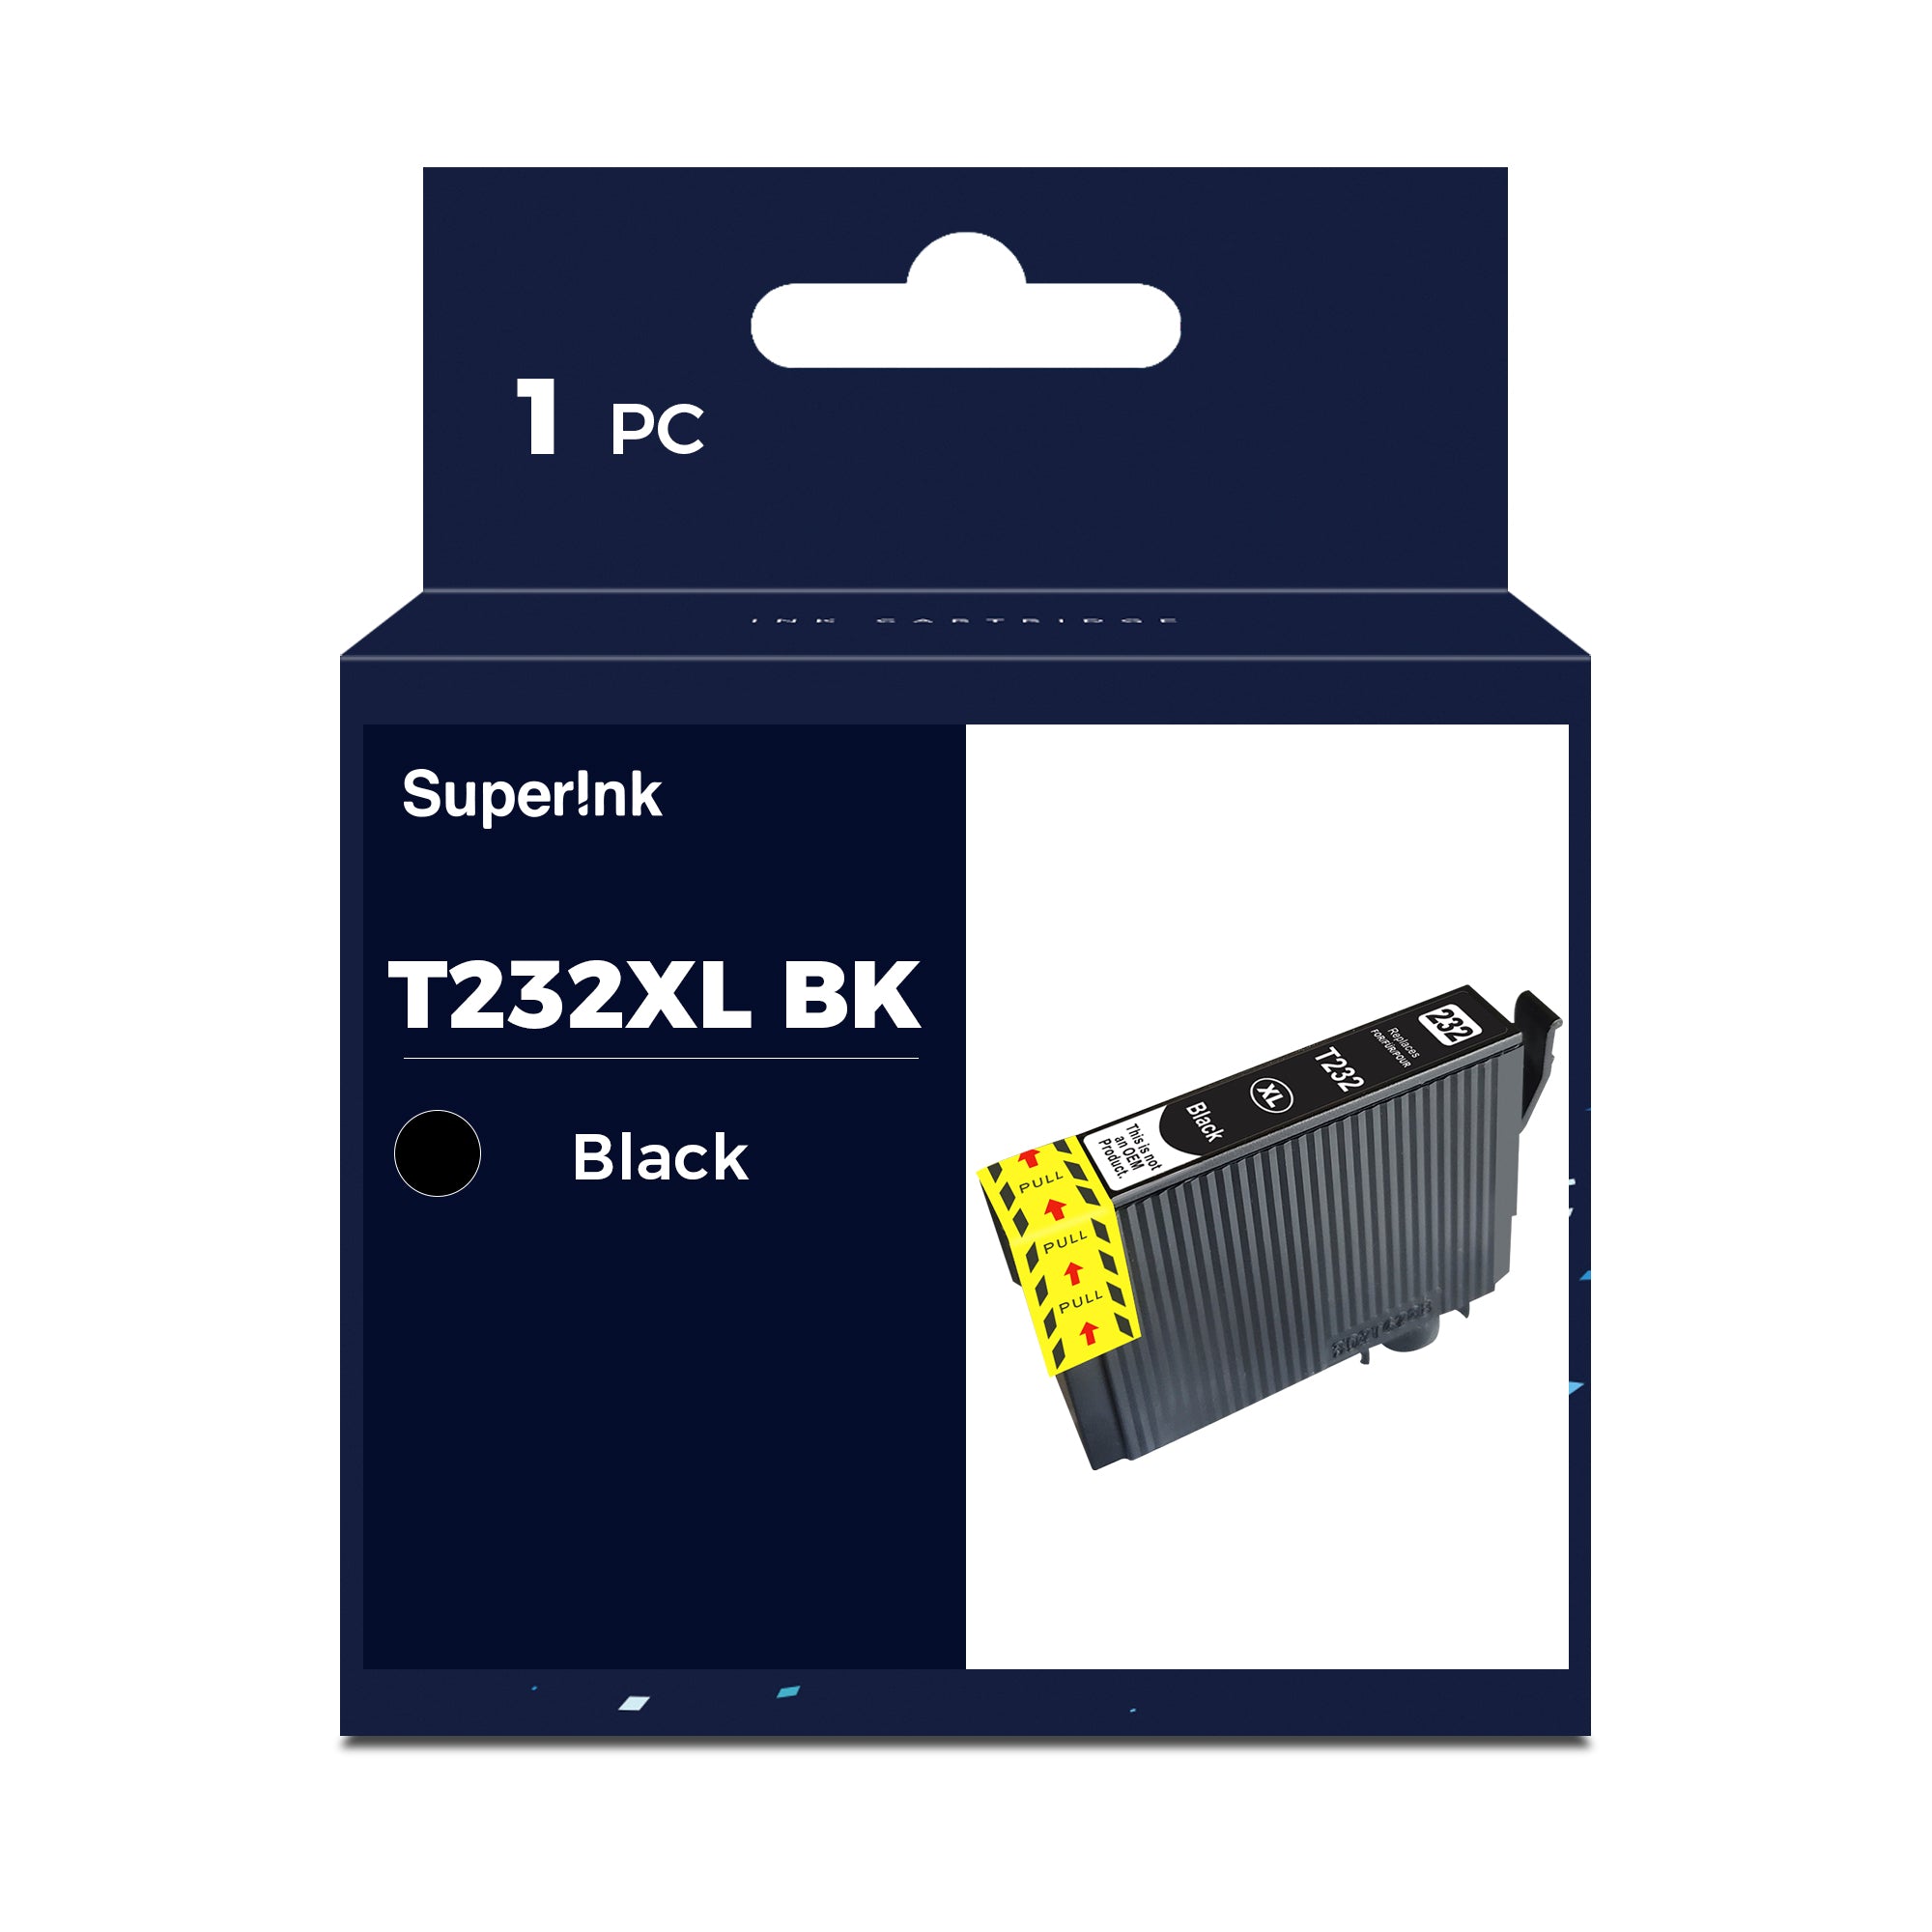 Compatible Epson T232xl Black High Yield Ink Cartridge By Superink Superinkca 9522